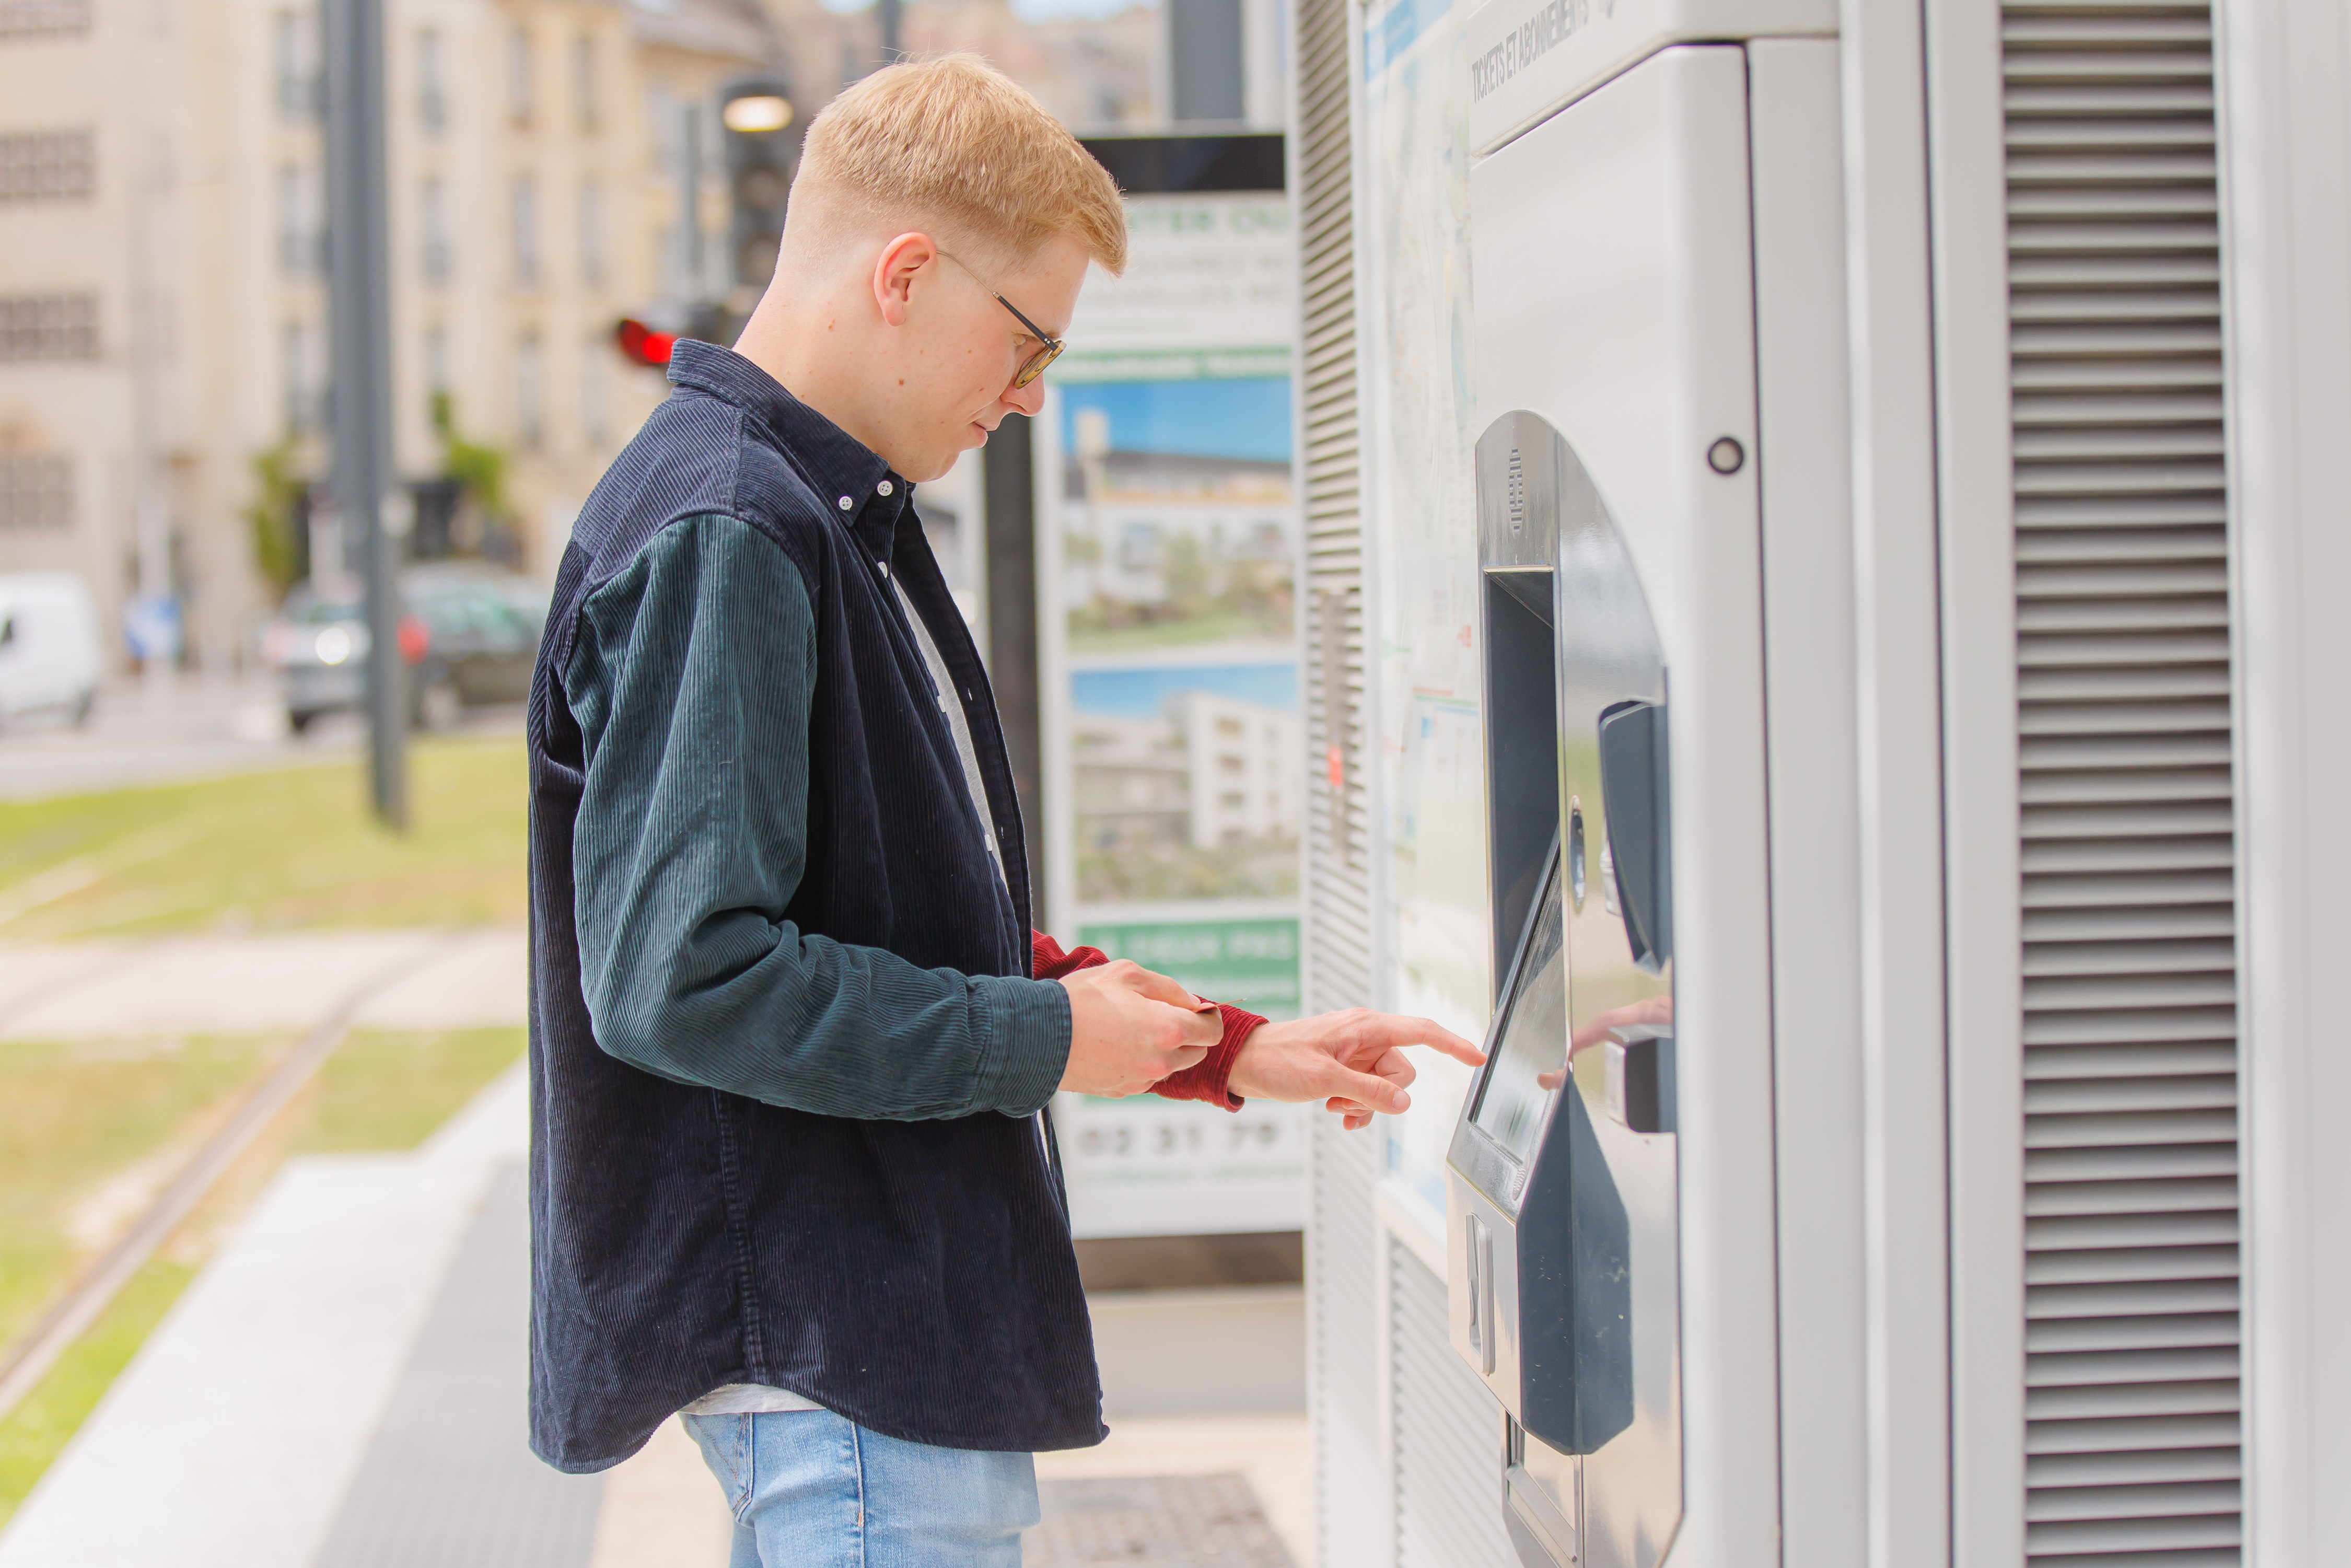 Selecting a transport ticket at a kiosk